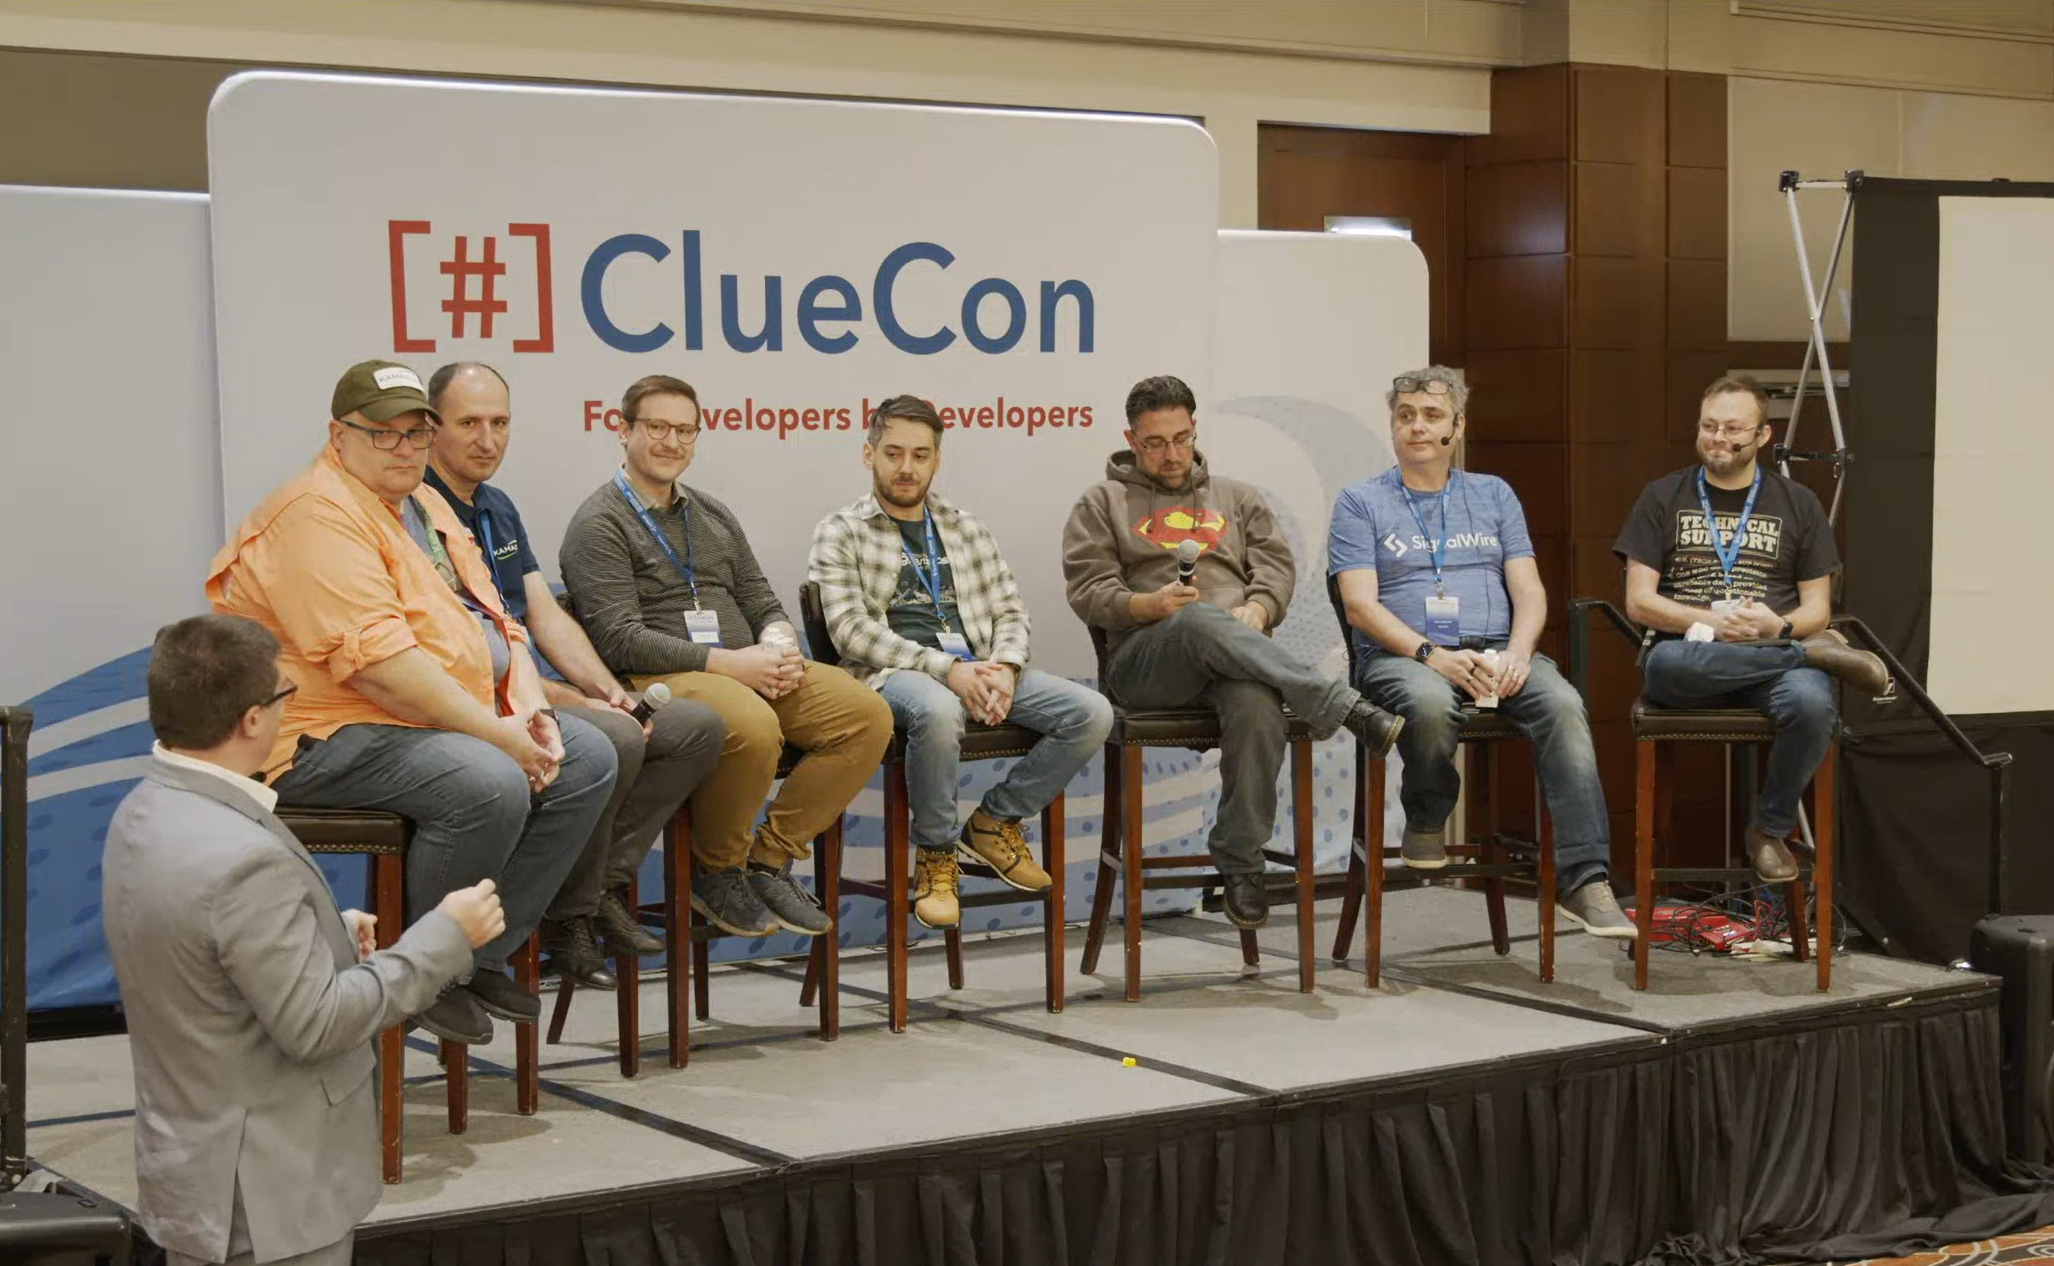 Open Source Roundtable, featuring Luca Pradovera as Moderator, Fred Posner, Daniel-Constantin Mierla, Jachen Duschletta, Liviu Chircu, Michael Jerris, Anthony Minessale, and Brian West.